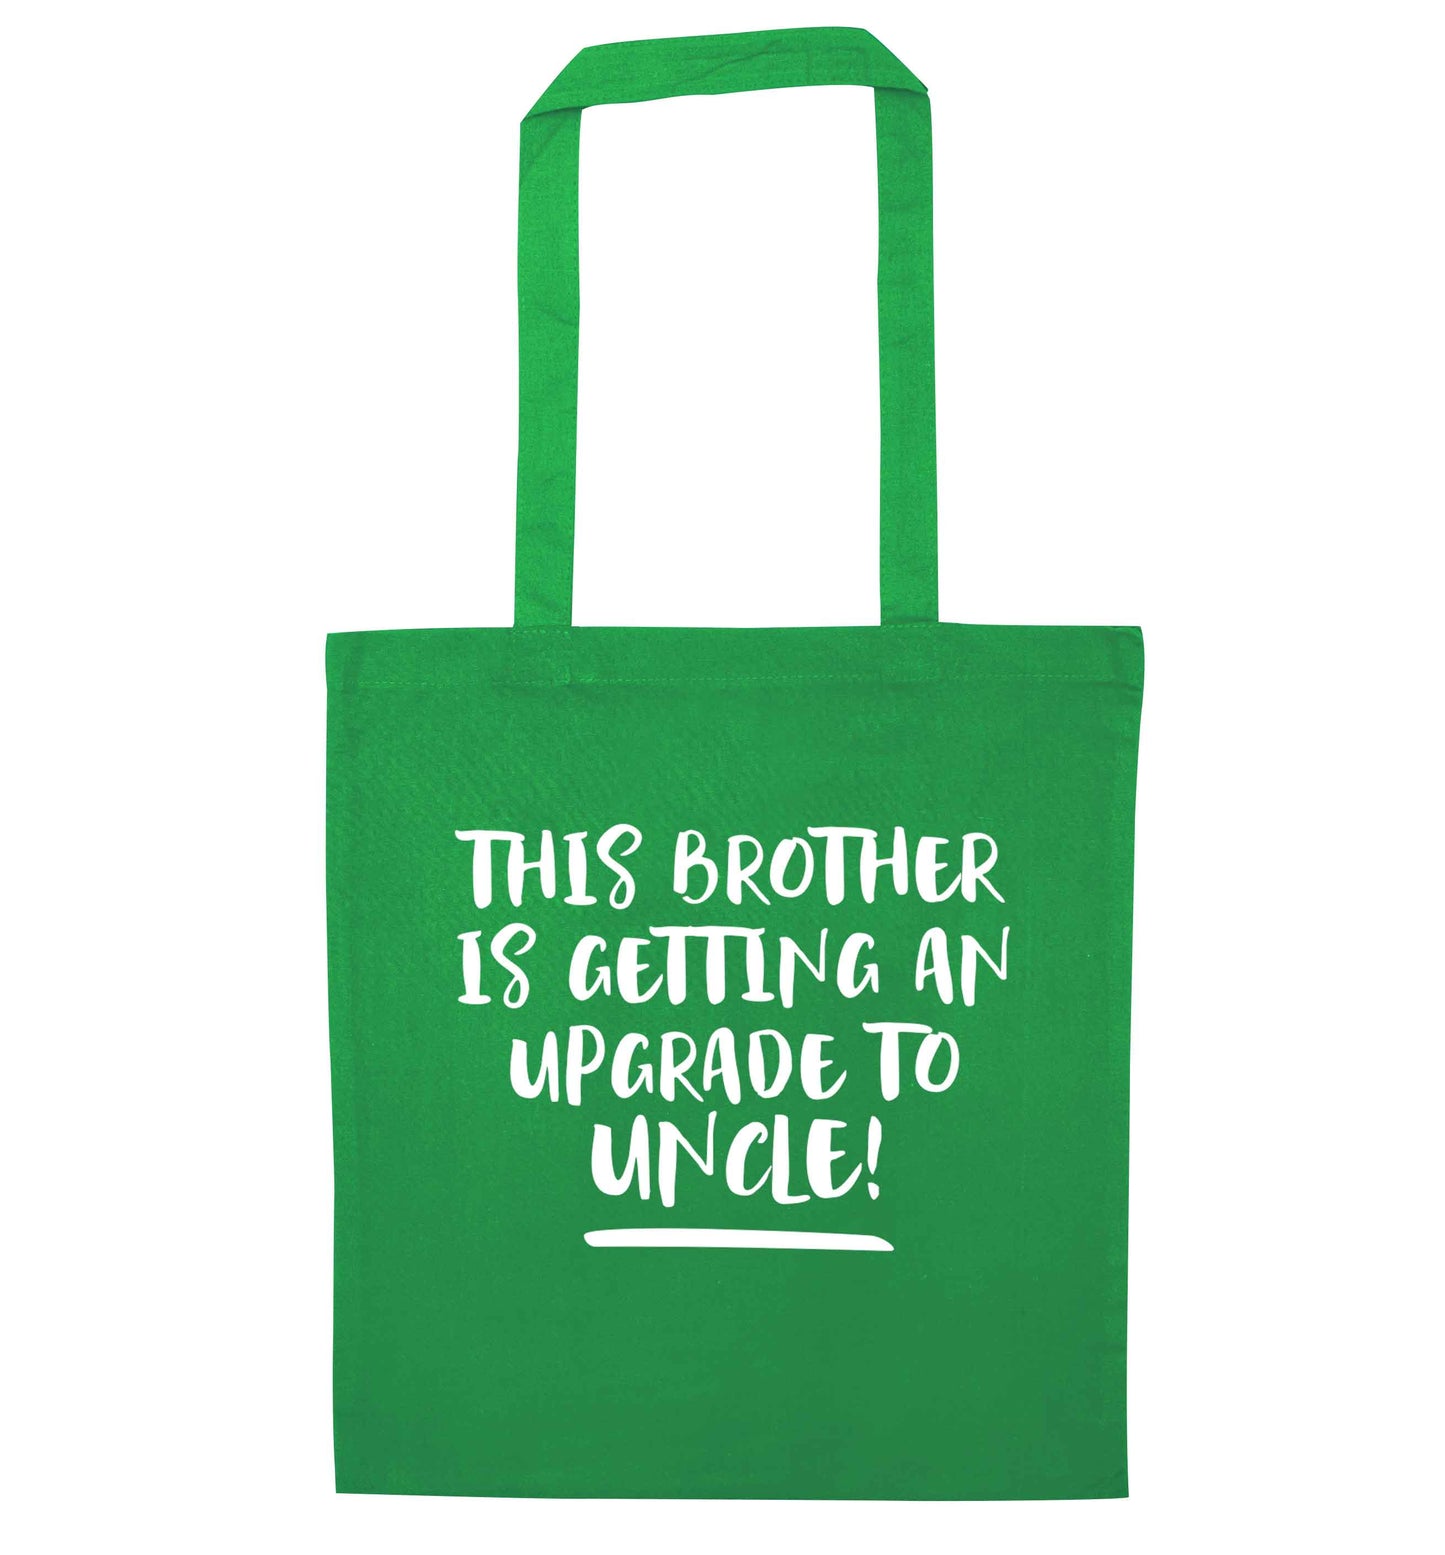 This brother is getting an upgrade to uncle! green tote bag